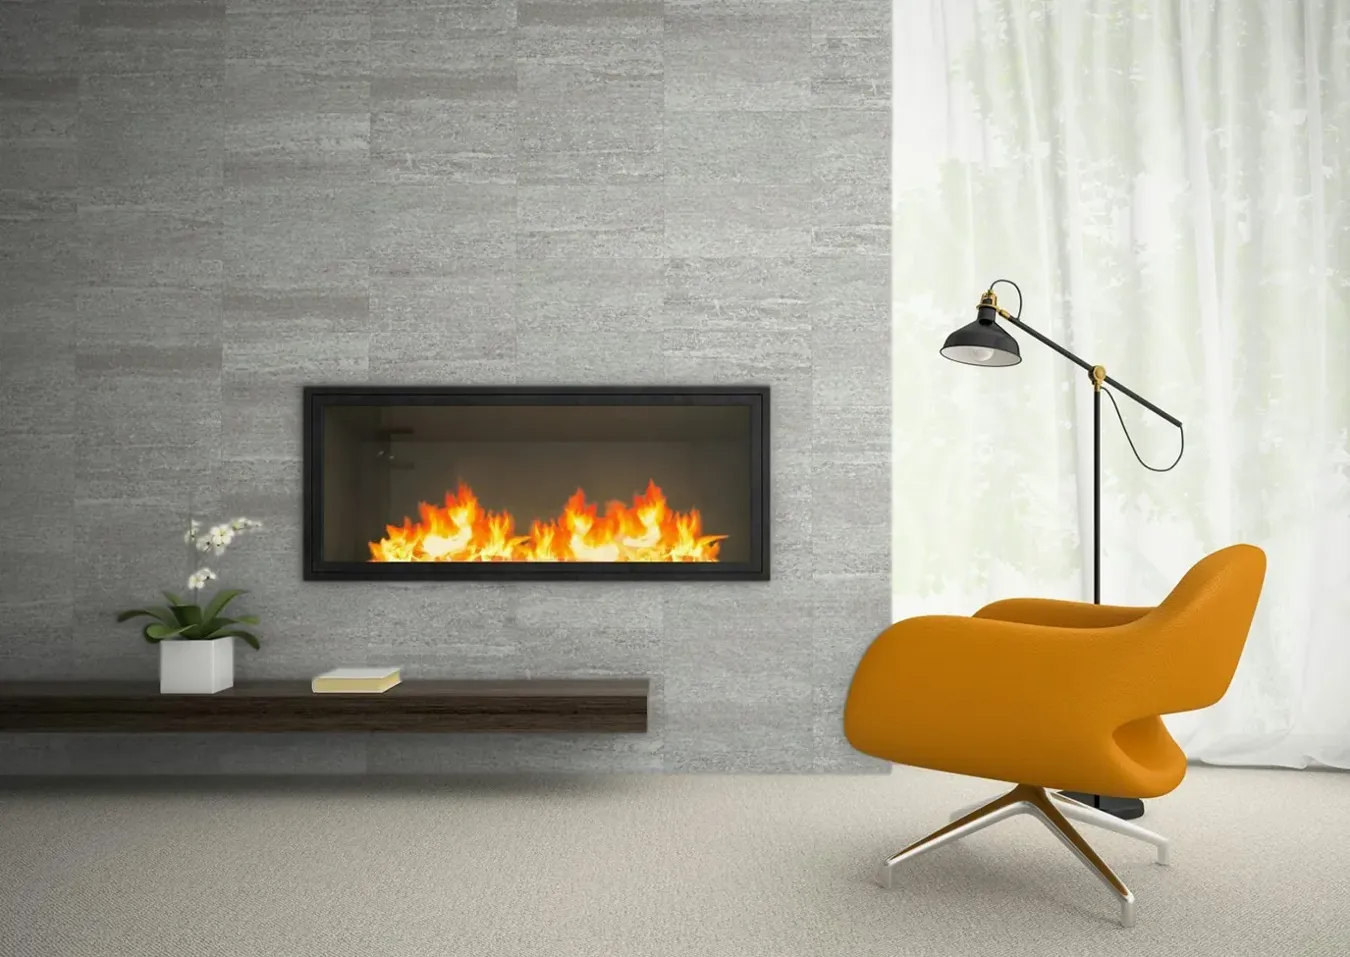 Modern interior with a fireplace clad in gray stone-effect tiles, yellow designer armchair, and floor lamp.